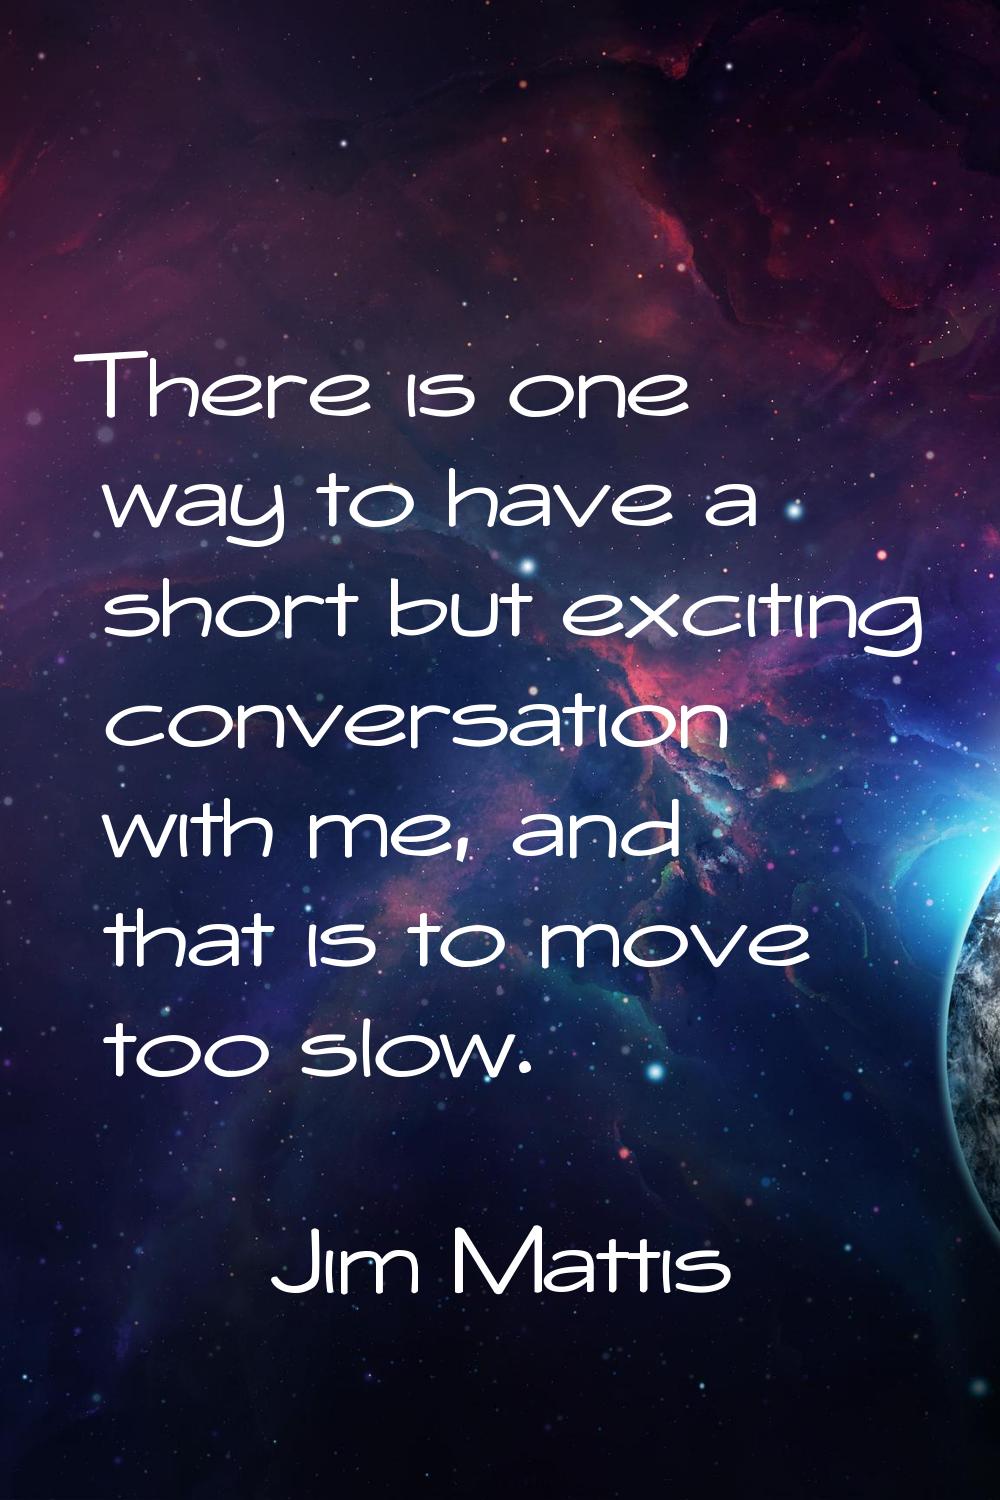 There is one way to have a short but exciting conversation with me, and that is to move too slow.